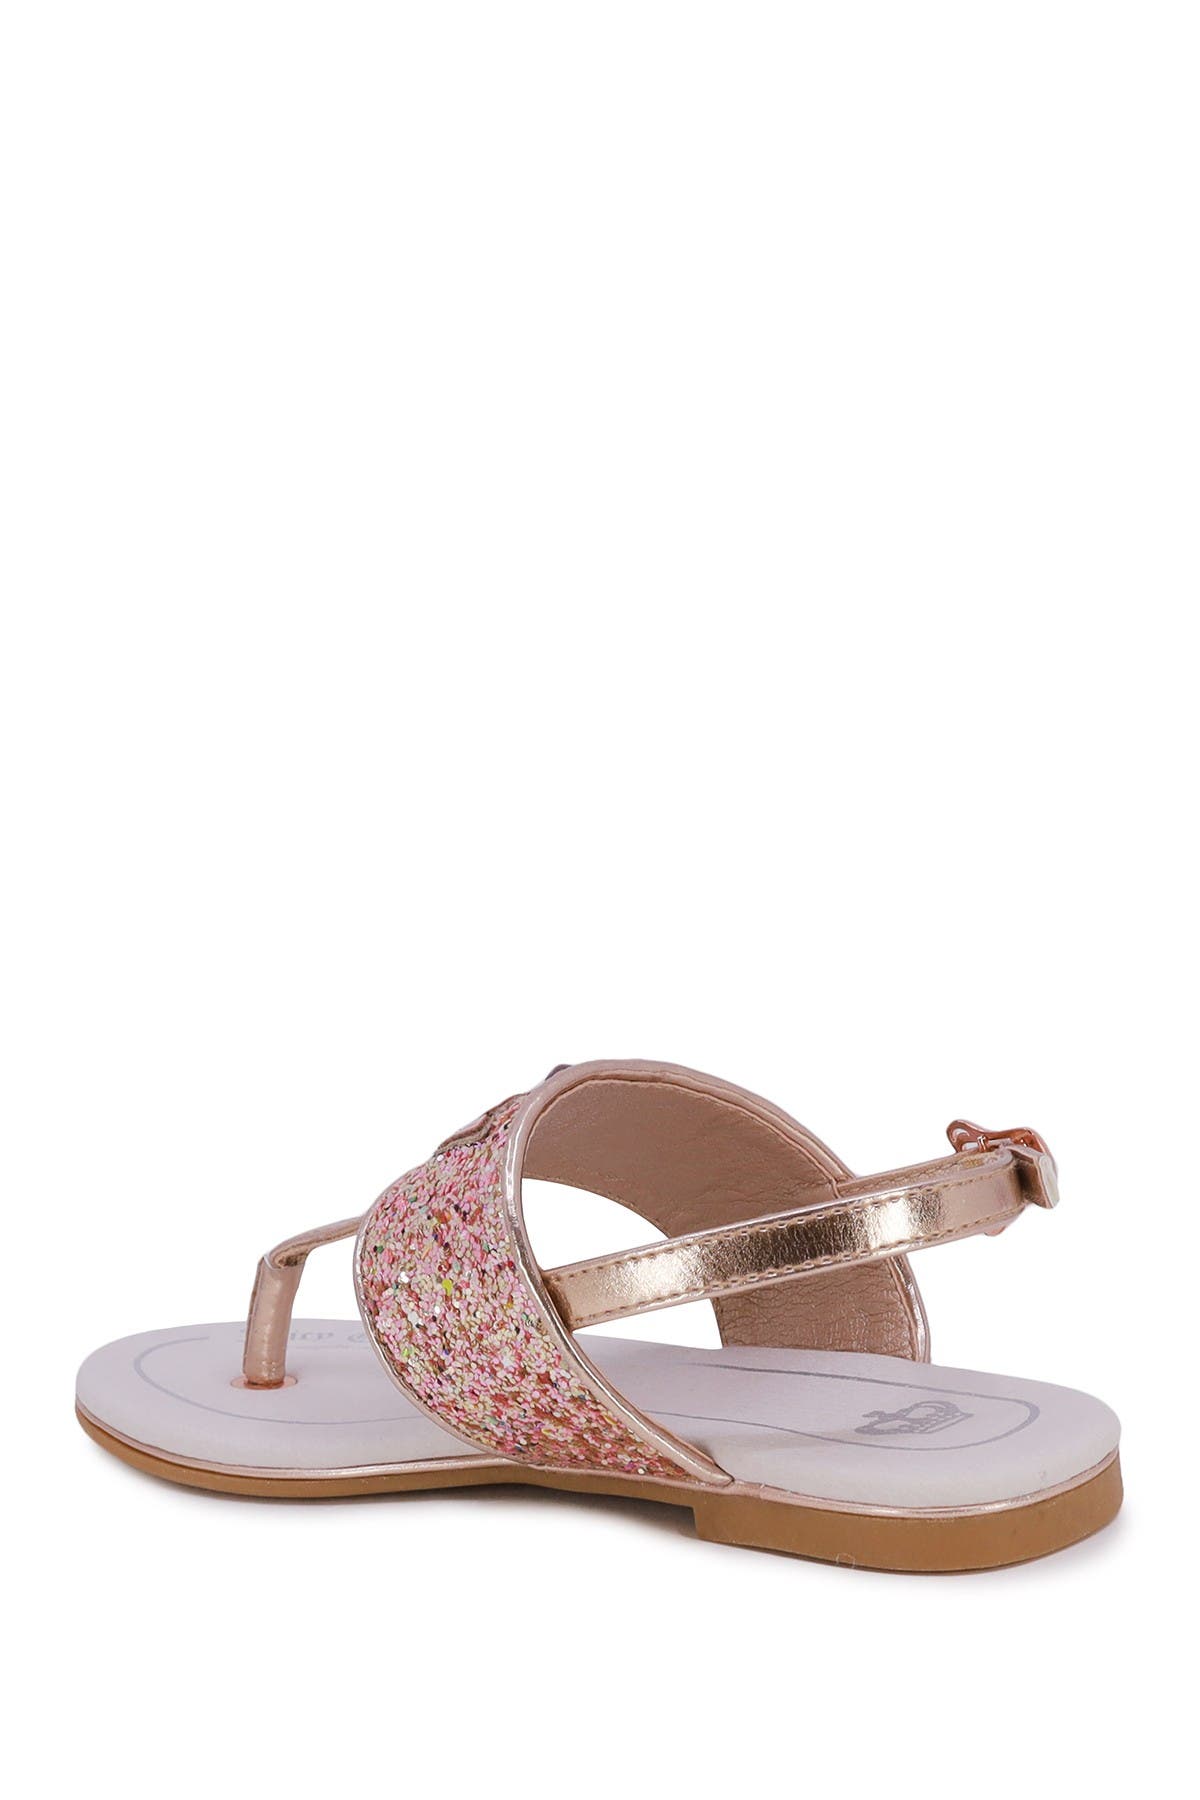 Juicy Couture Kids' Dana Point Thong Toe Sandal In Rose Gold